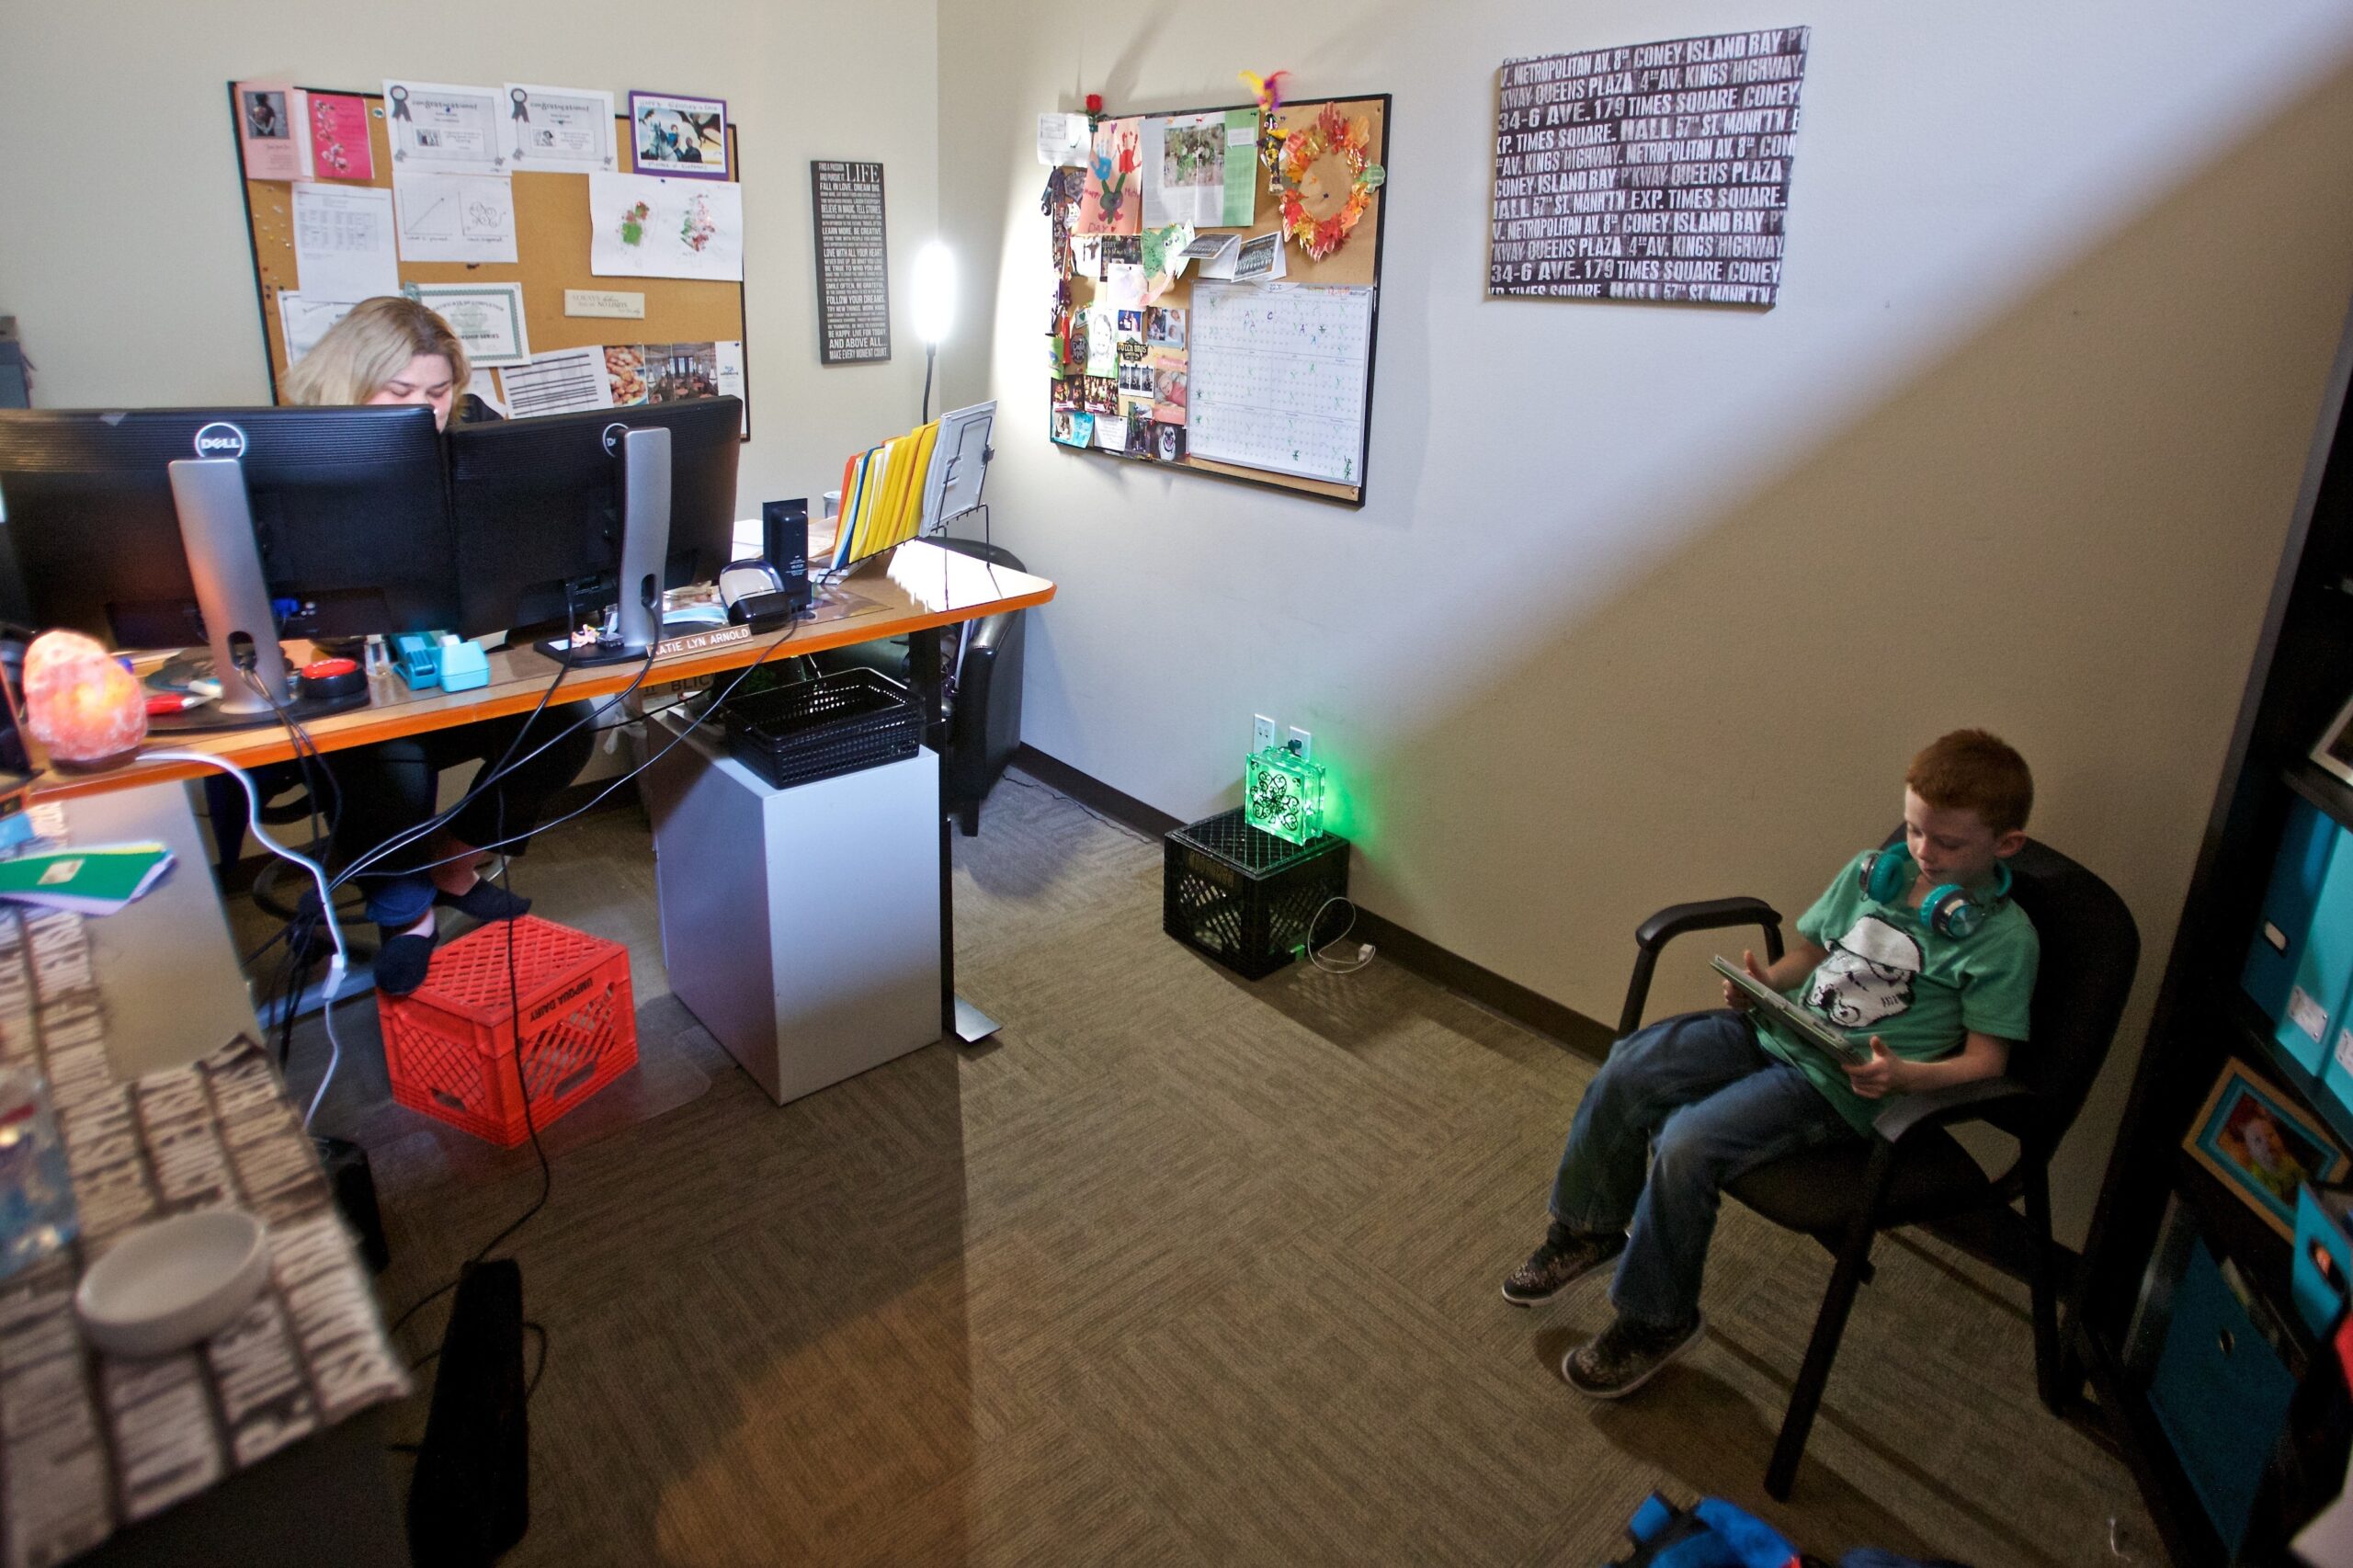 atie Arnold works while her son Rowen Arnold plays educational games on her iPad